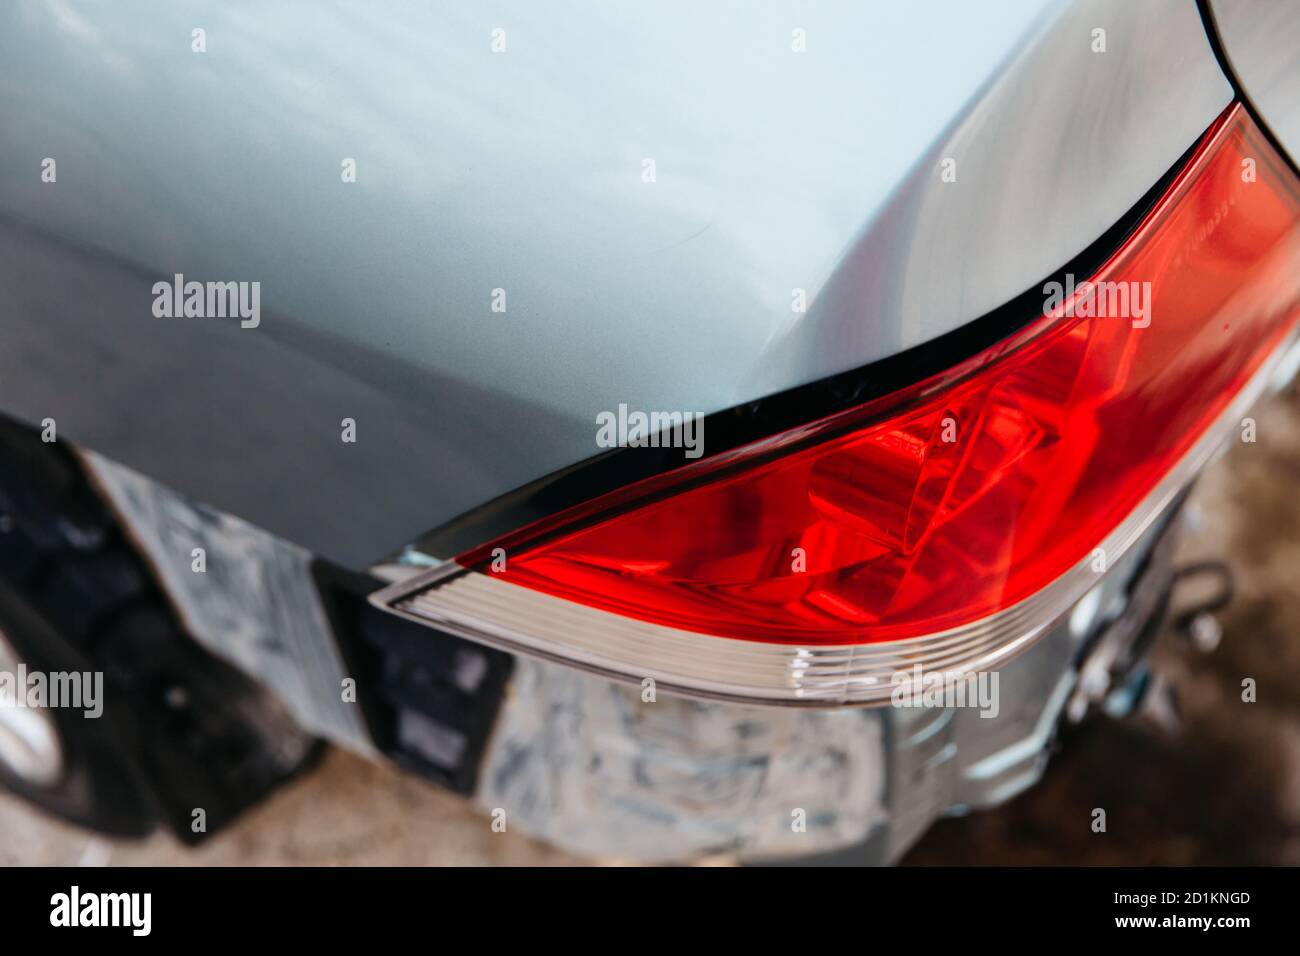 Car tail light broken in an accident. Stock Photo